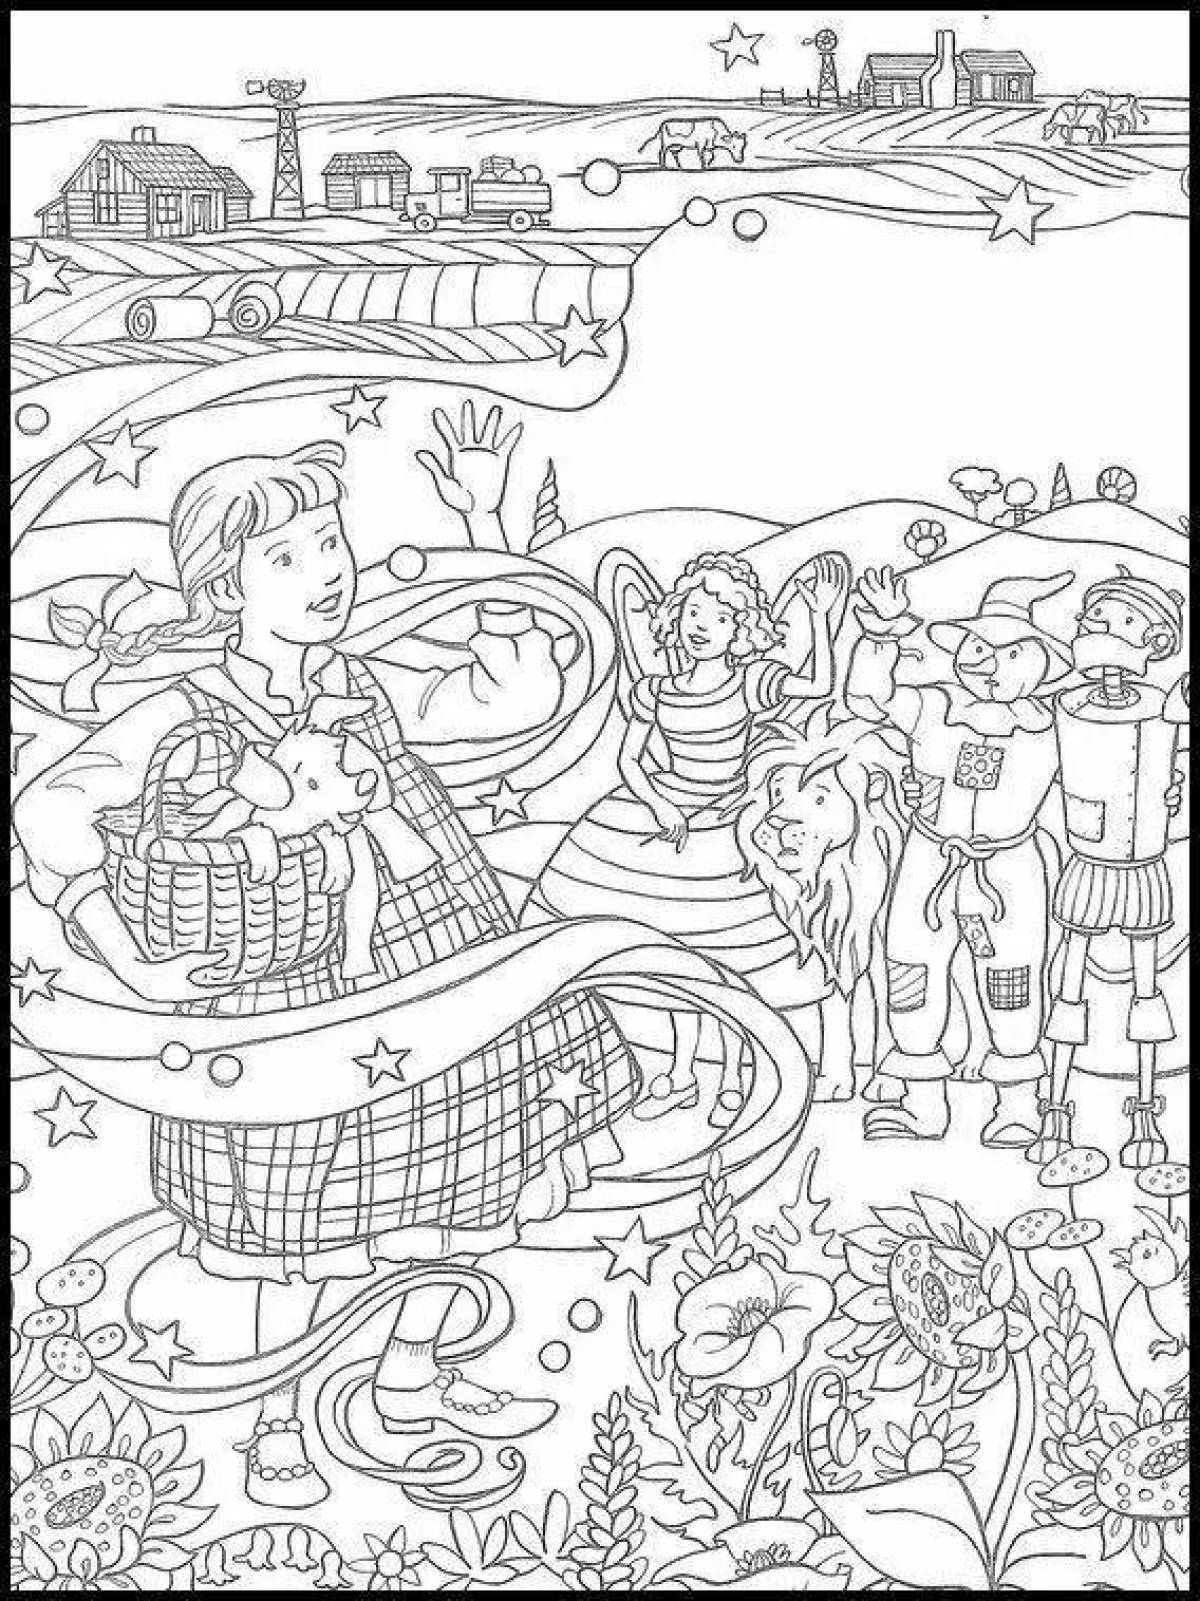 Coloring page the magical wizard of oz